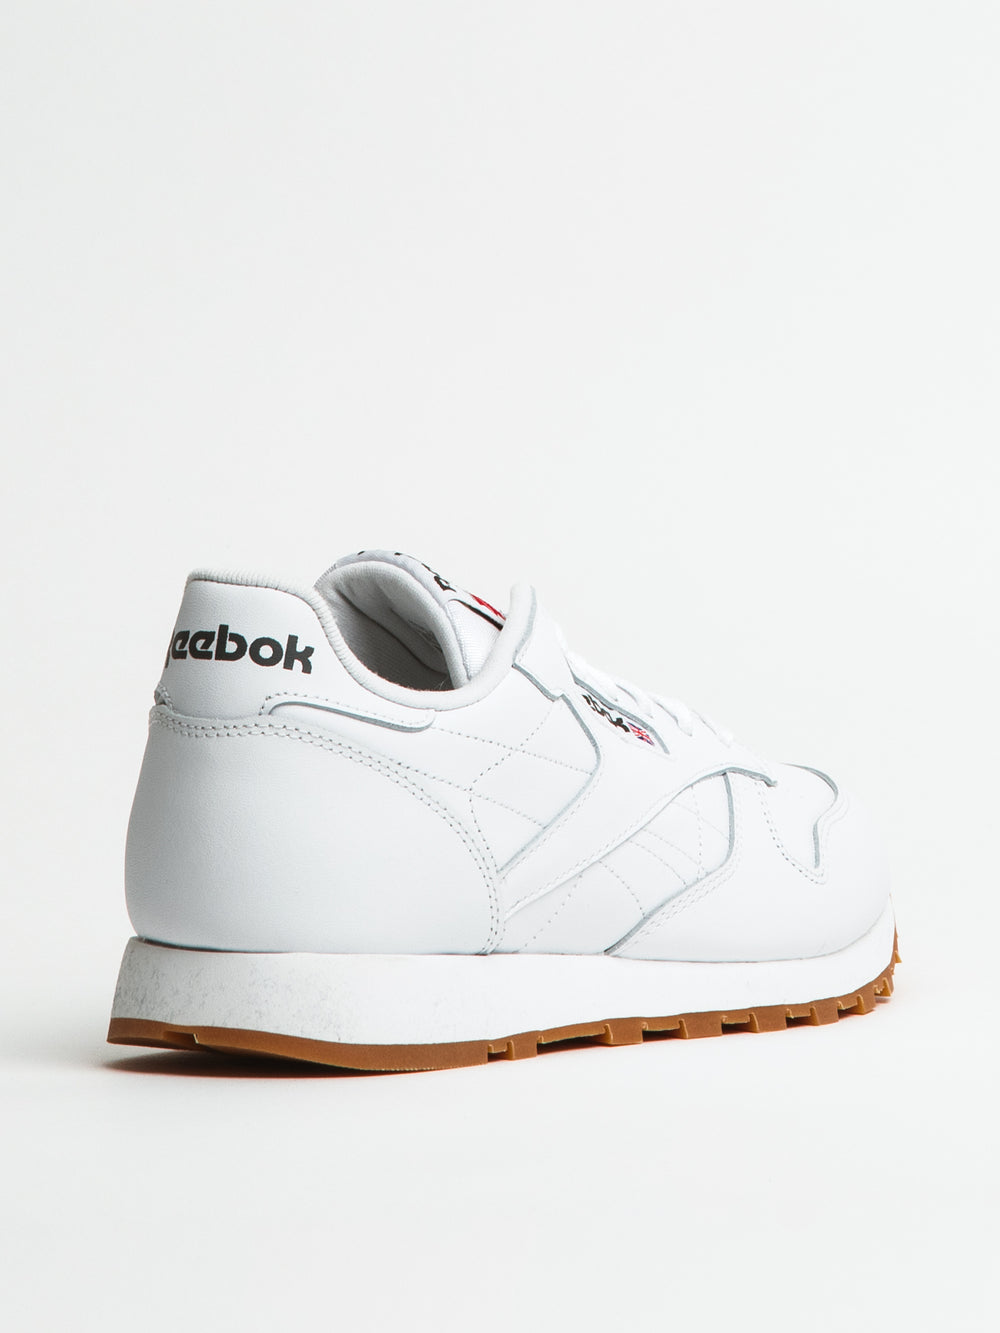 MENS REEBOK CLASSIC LEATHER SNEAKERS - CLEARANCE